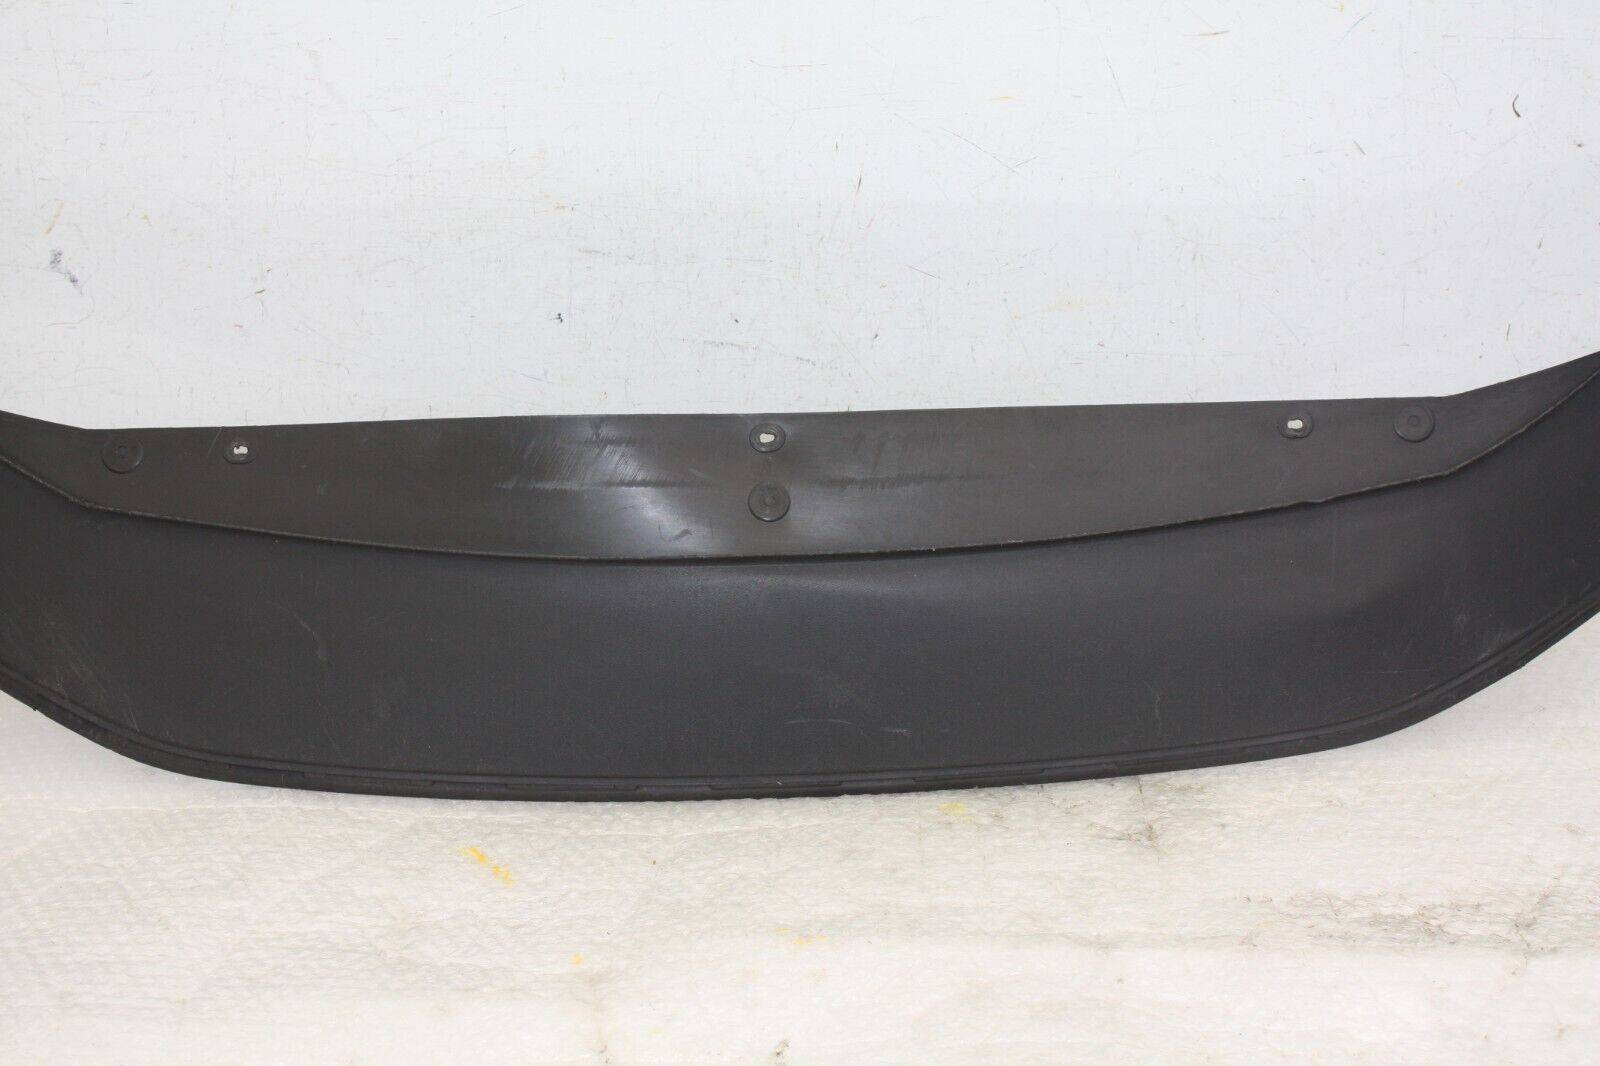 VW-Sharan-Front-Bumper-Under-Tray-2010-TO-2015-7N0805903-Genuine-BENT-PRESSED-176364637762-3